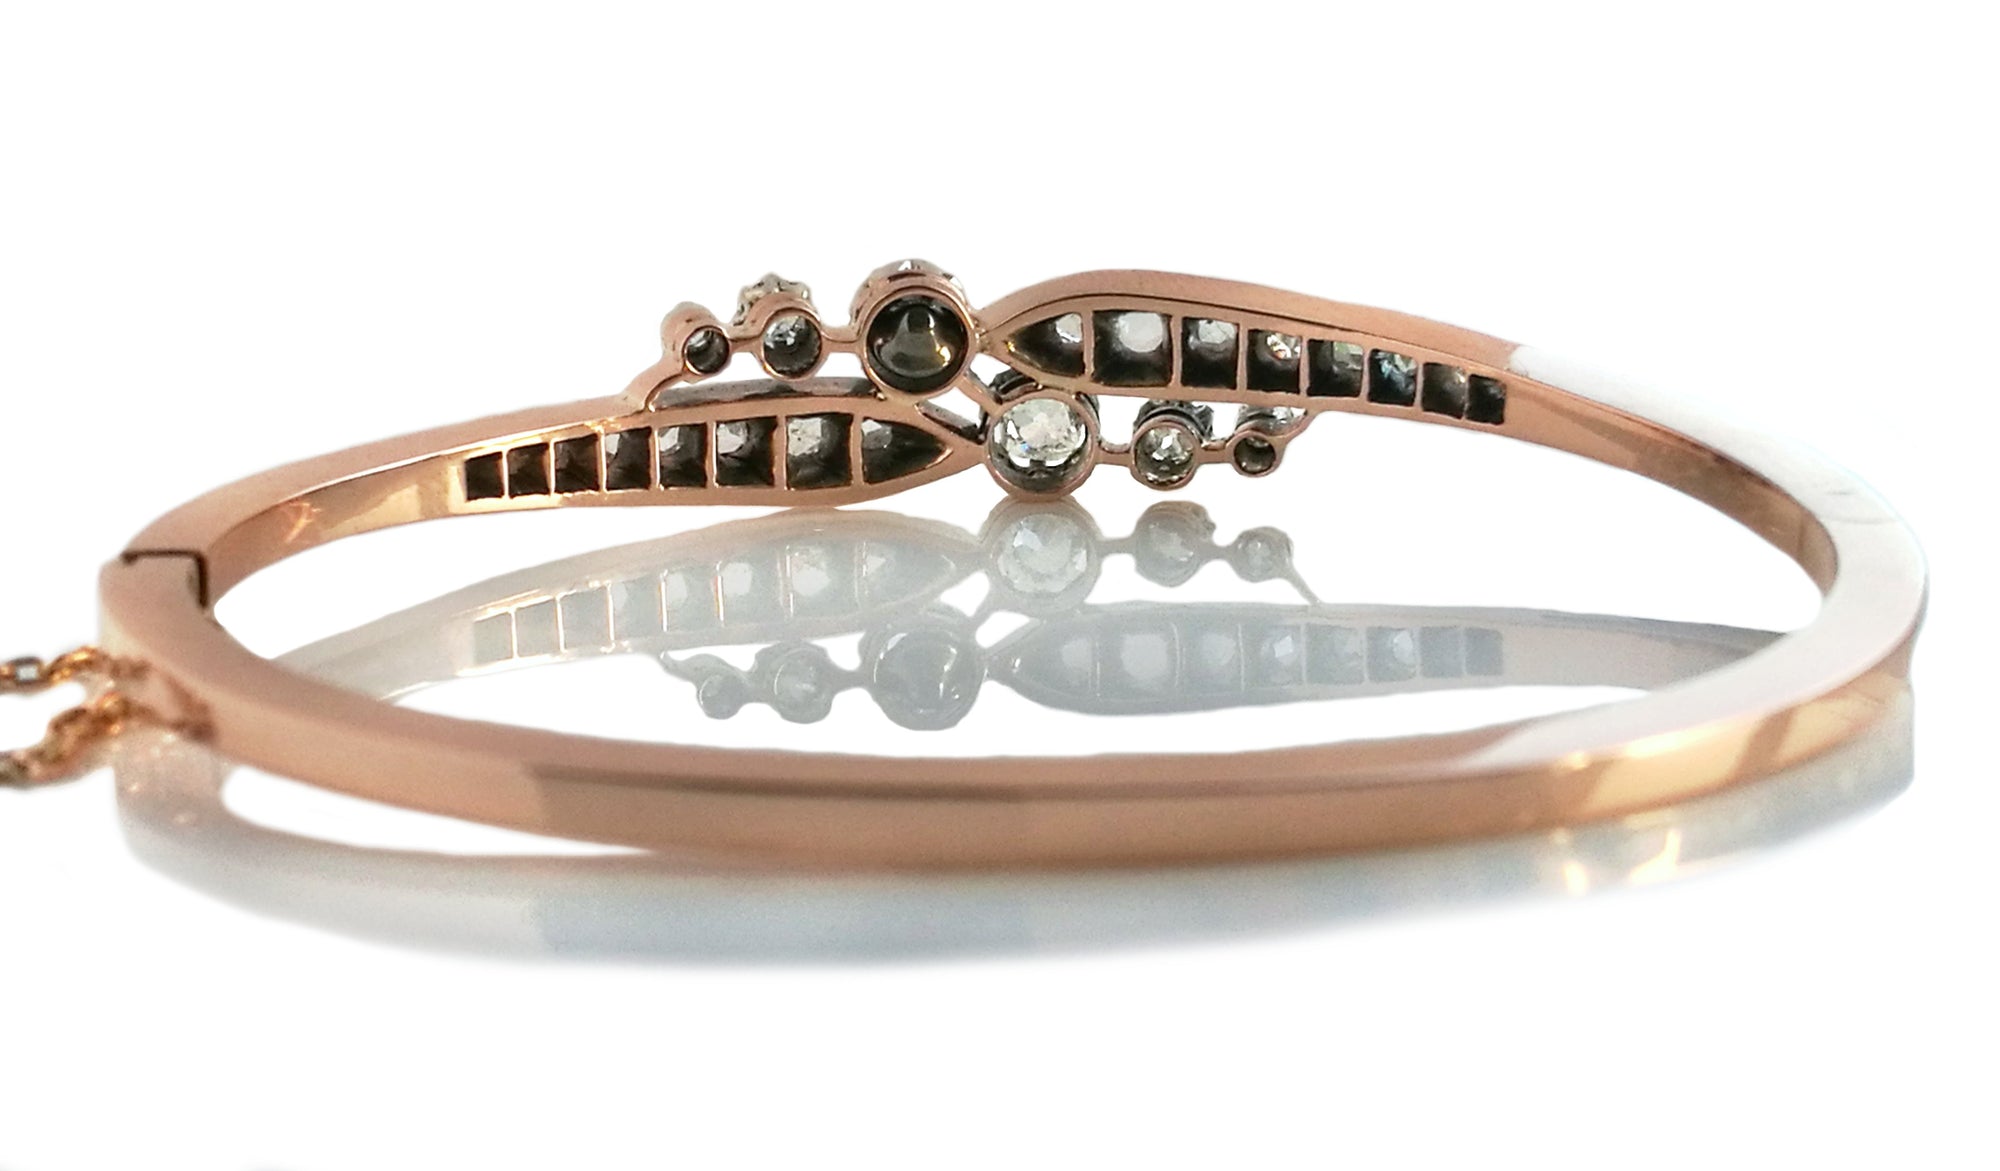 Victorian French 1.35tcw Old Cut & Rose Cut Diamond Bangle in 18k Rose Gold